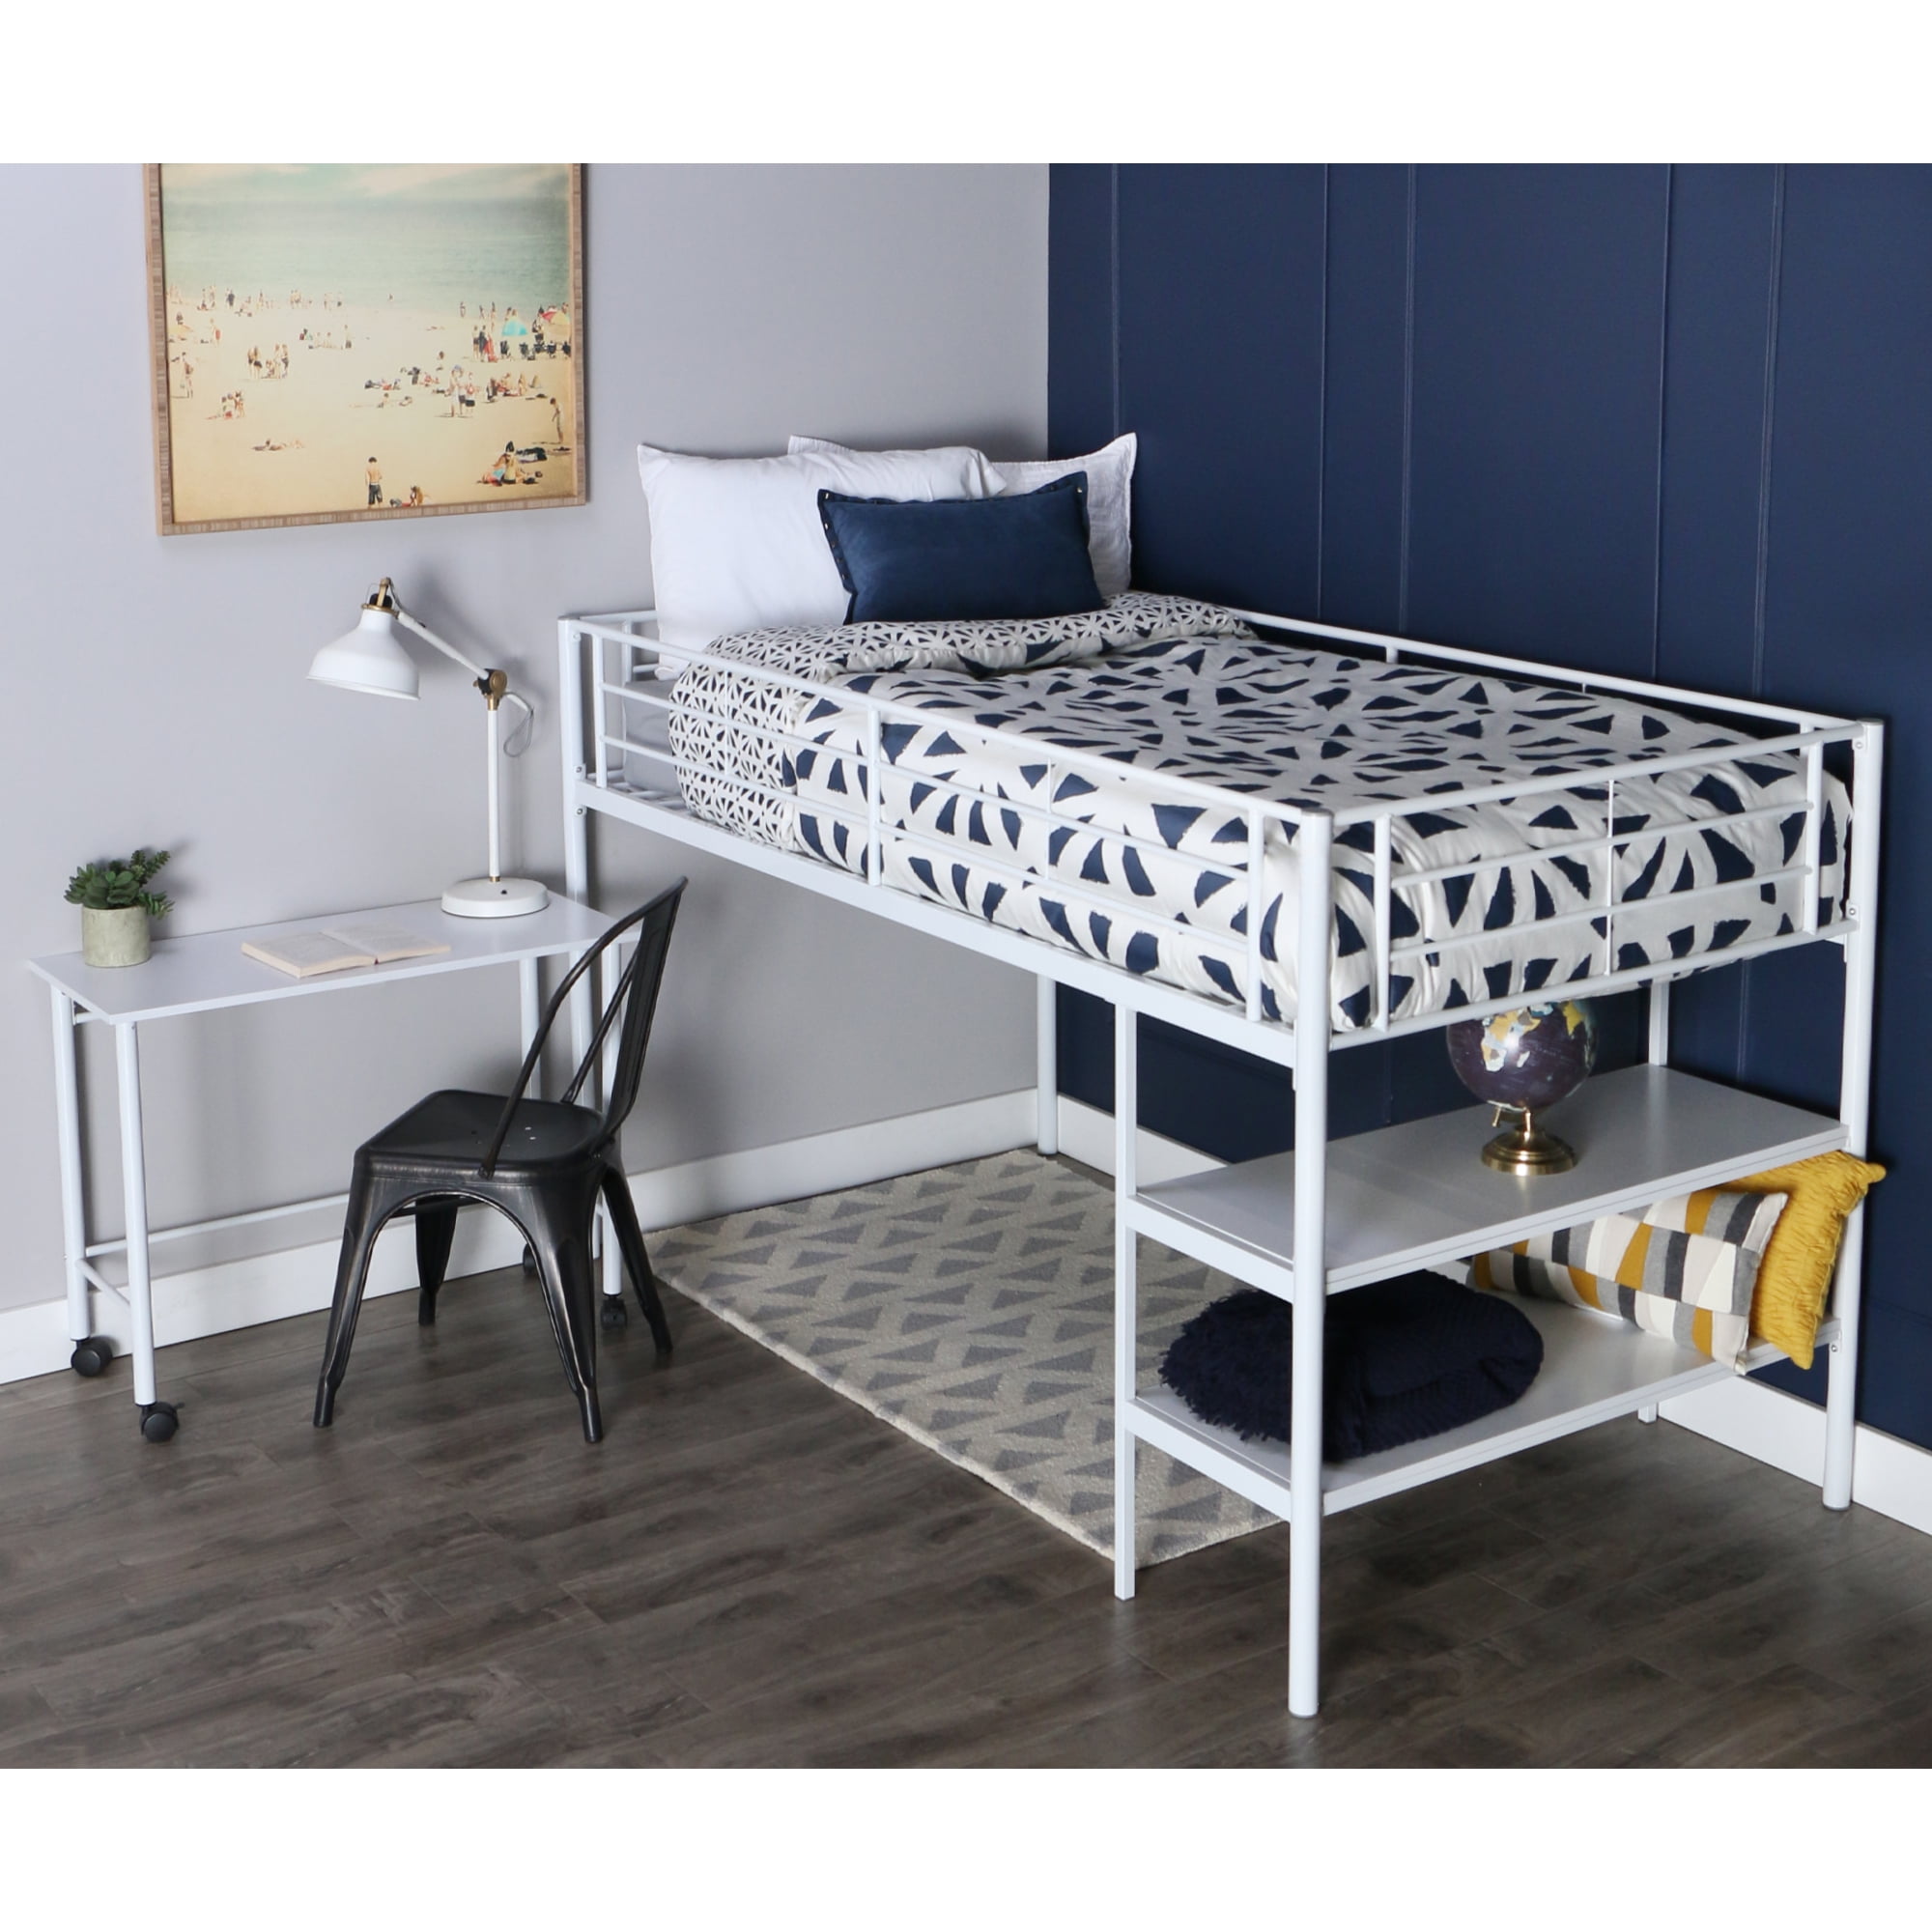 white metal loft bed with desk